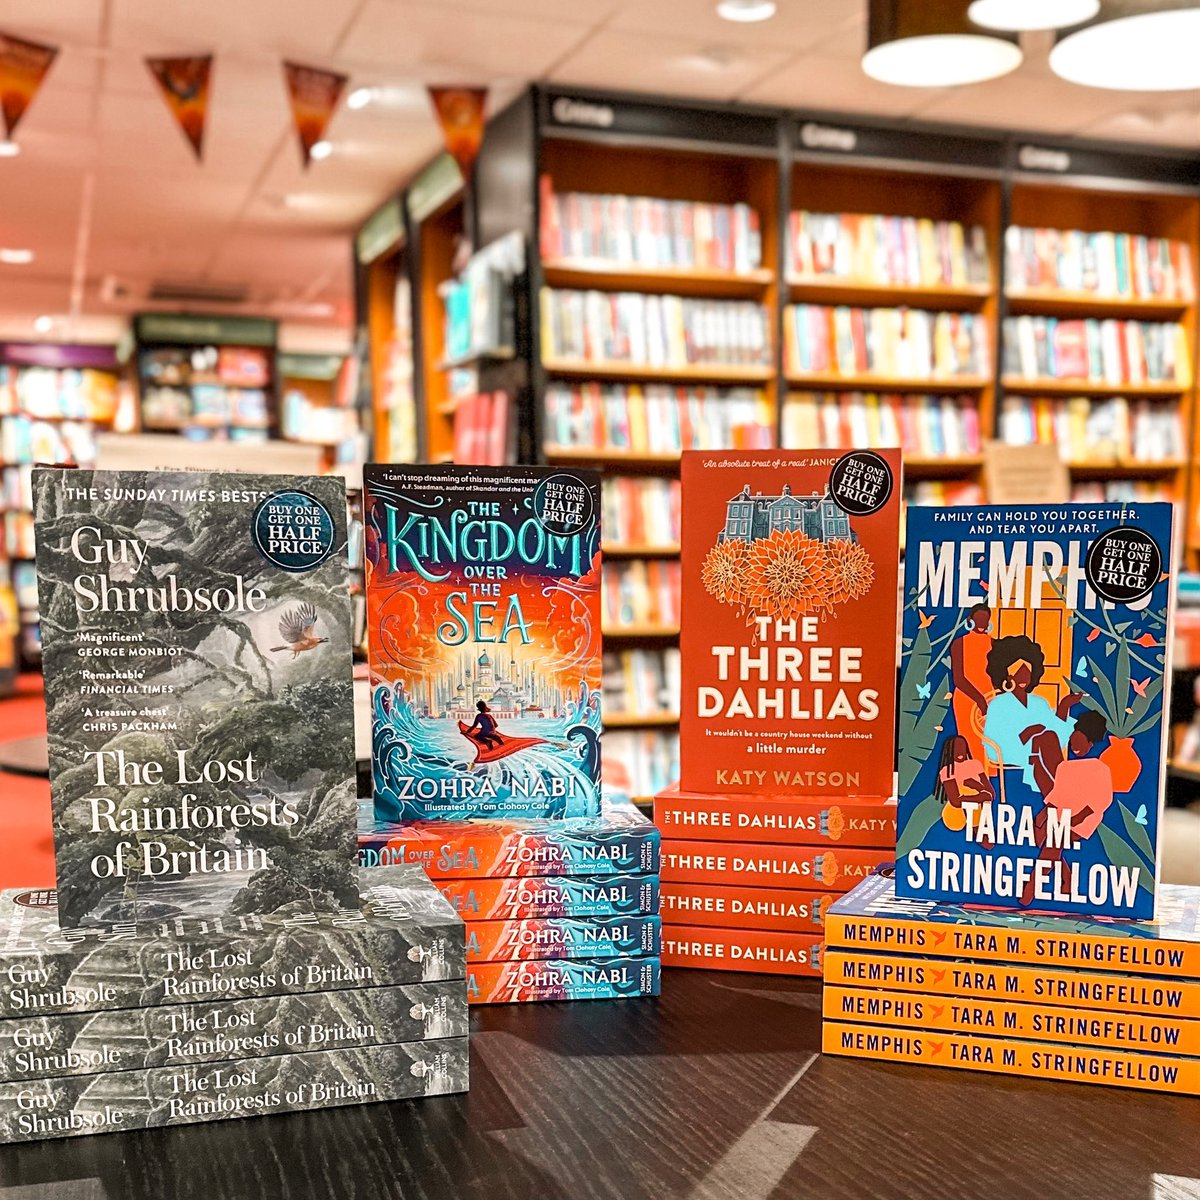 A new month means a new crop of books of the month and, as always, they’re buy one get one half price!

#bookstagram #waterstonesnorthallerton #northallerton #bookshop #lovenorthallerton #waterstones #memphis #thelostrainforestsofbritain #thekingdomoverthesea #thethreedahlias